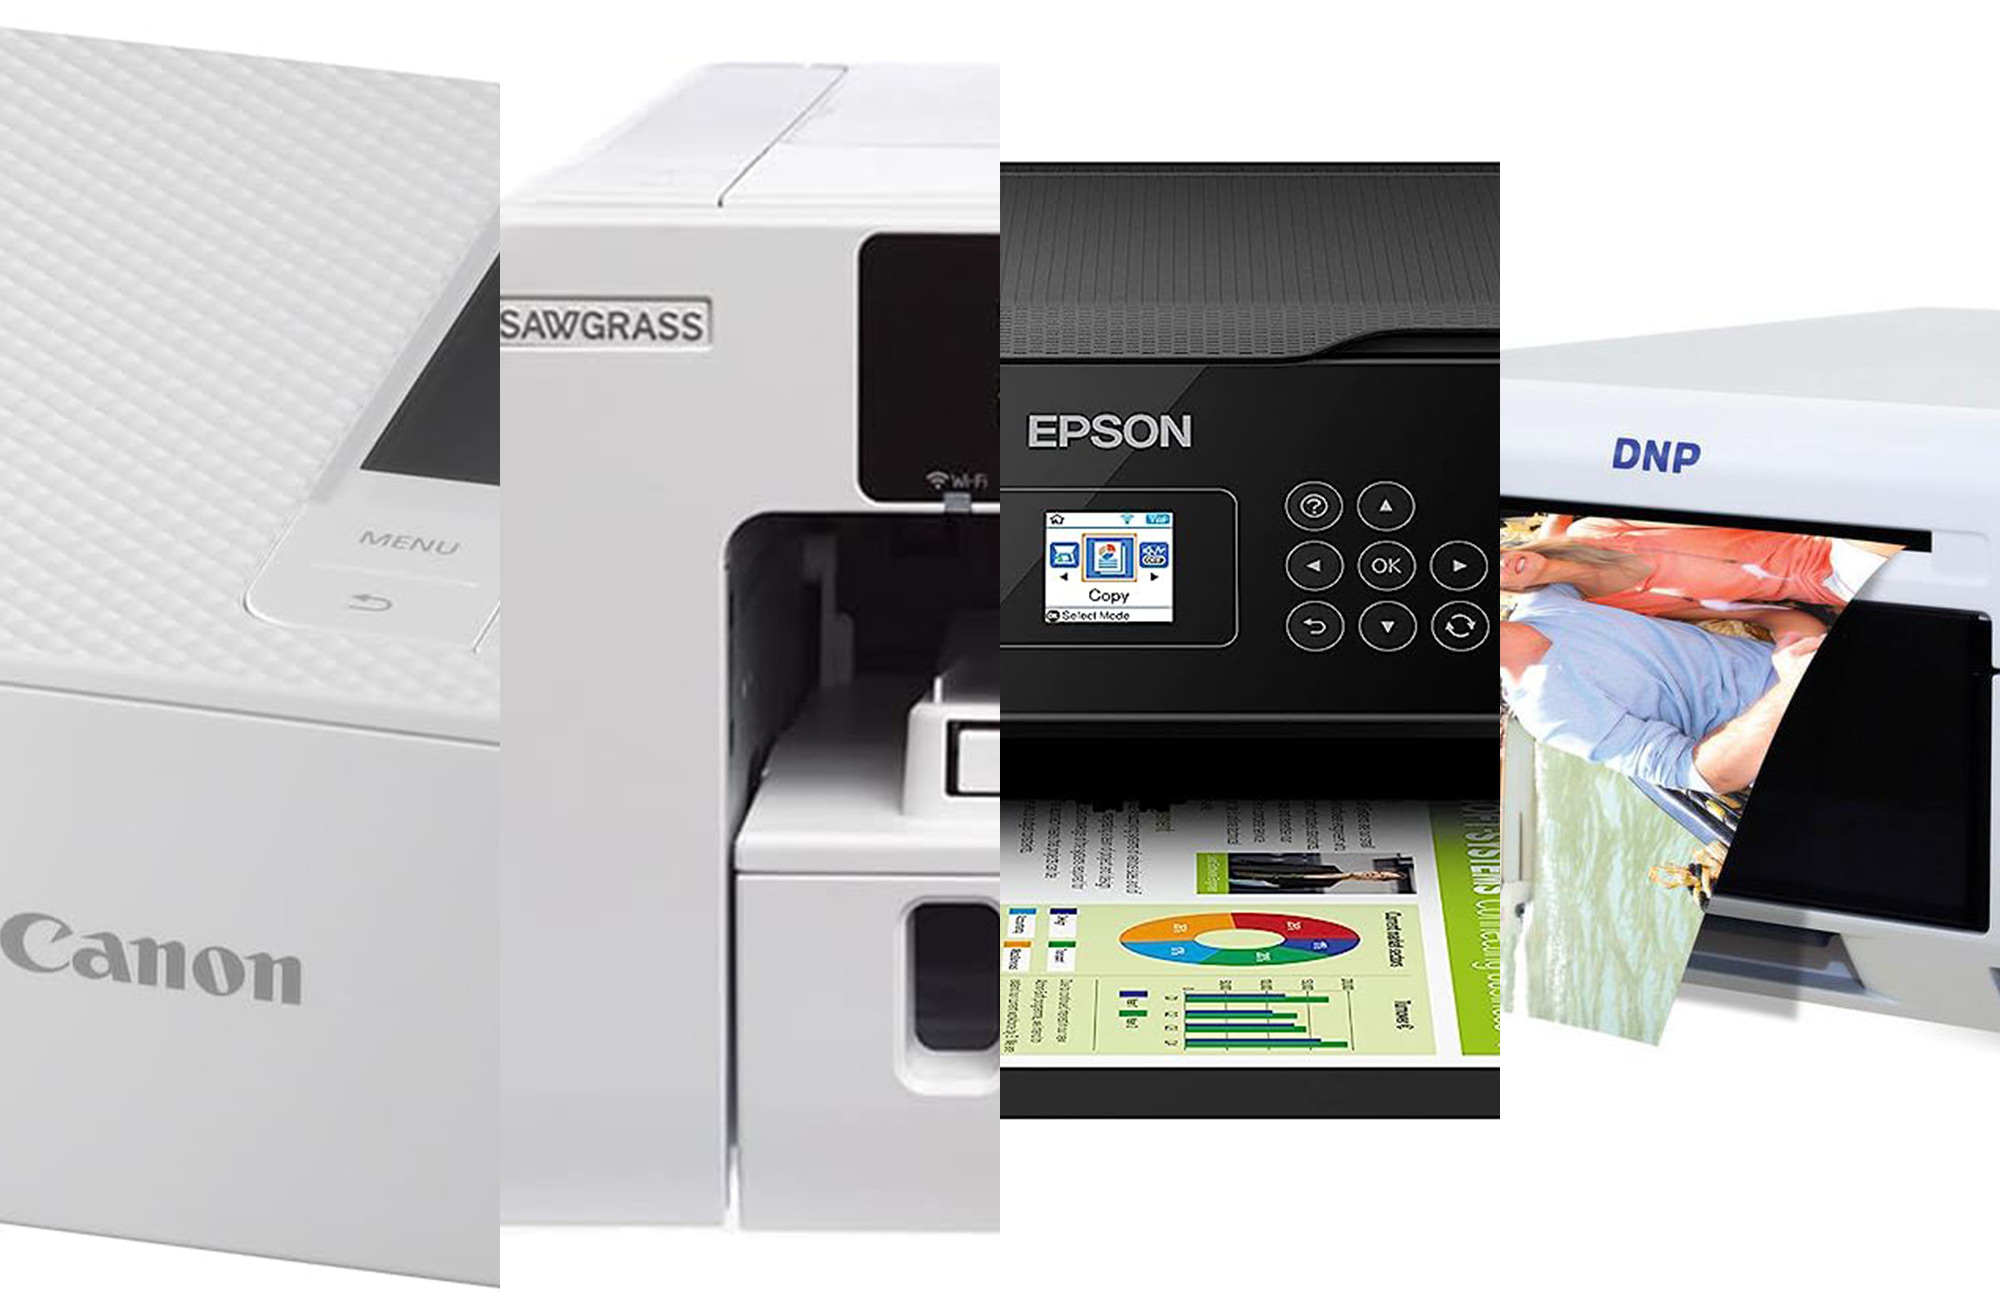 Sublimation for Beginners: Printers, Ink, Paper, and EVERYTHING You Need to  Get Started! 